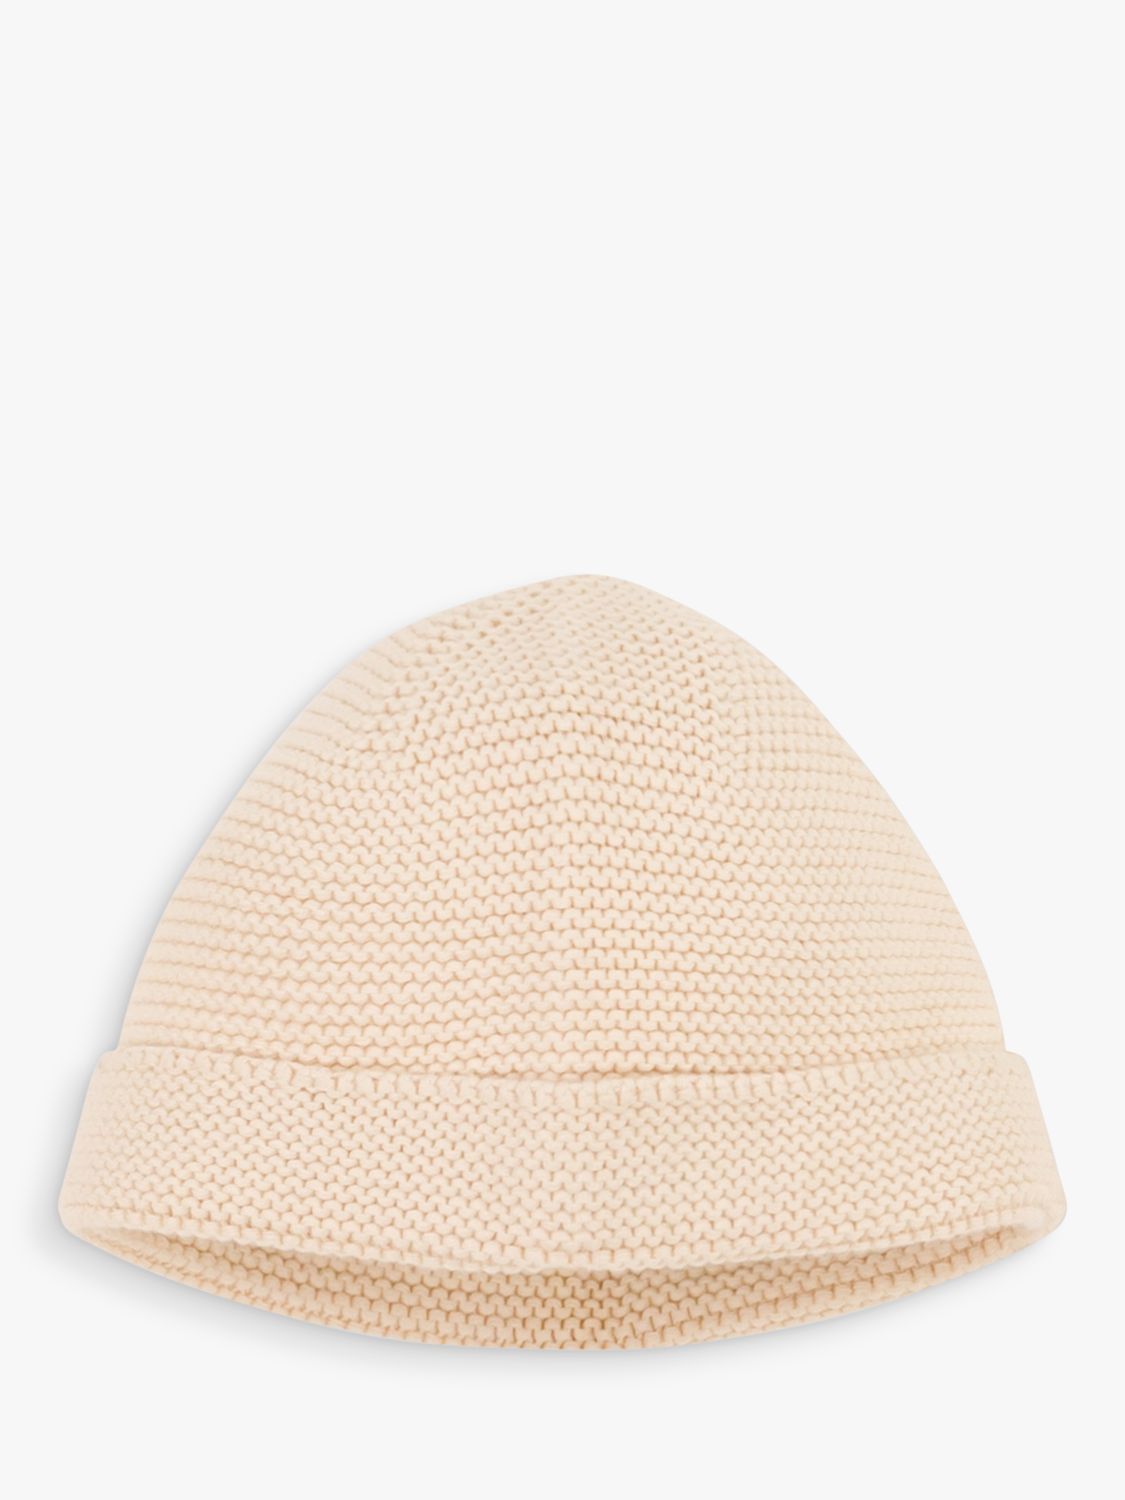 Petit Bateau Baby Cotton Knitted Hat, Avalanche, 6-12 months